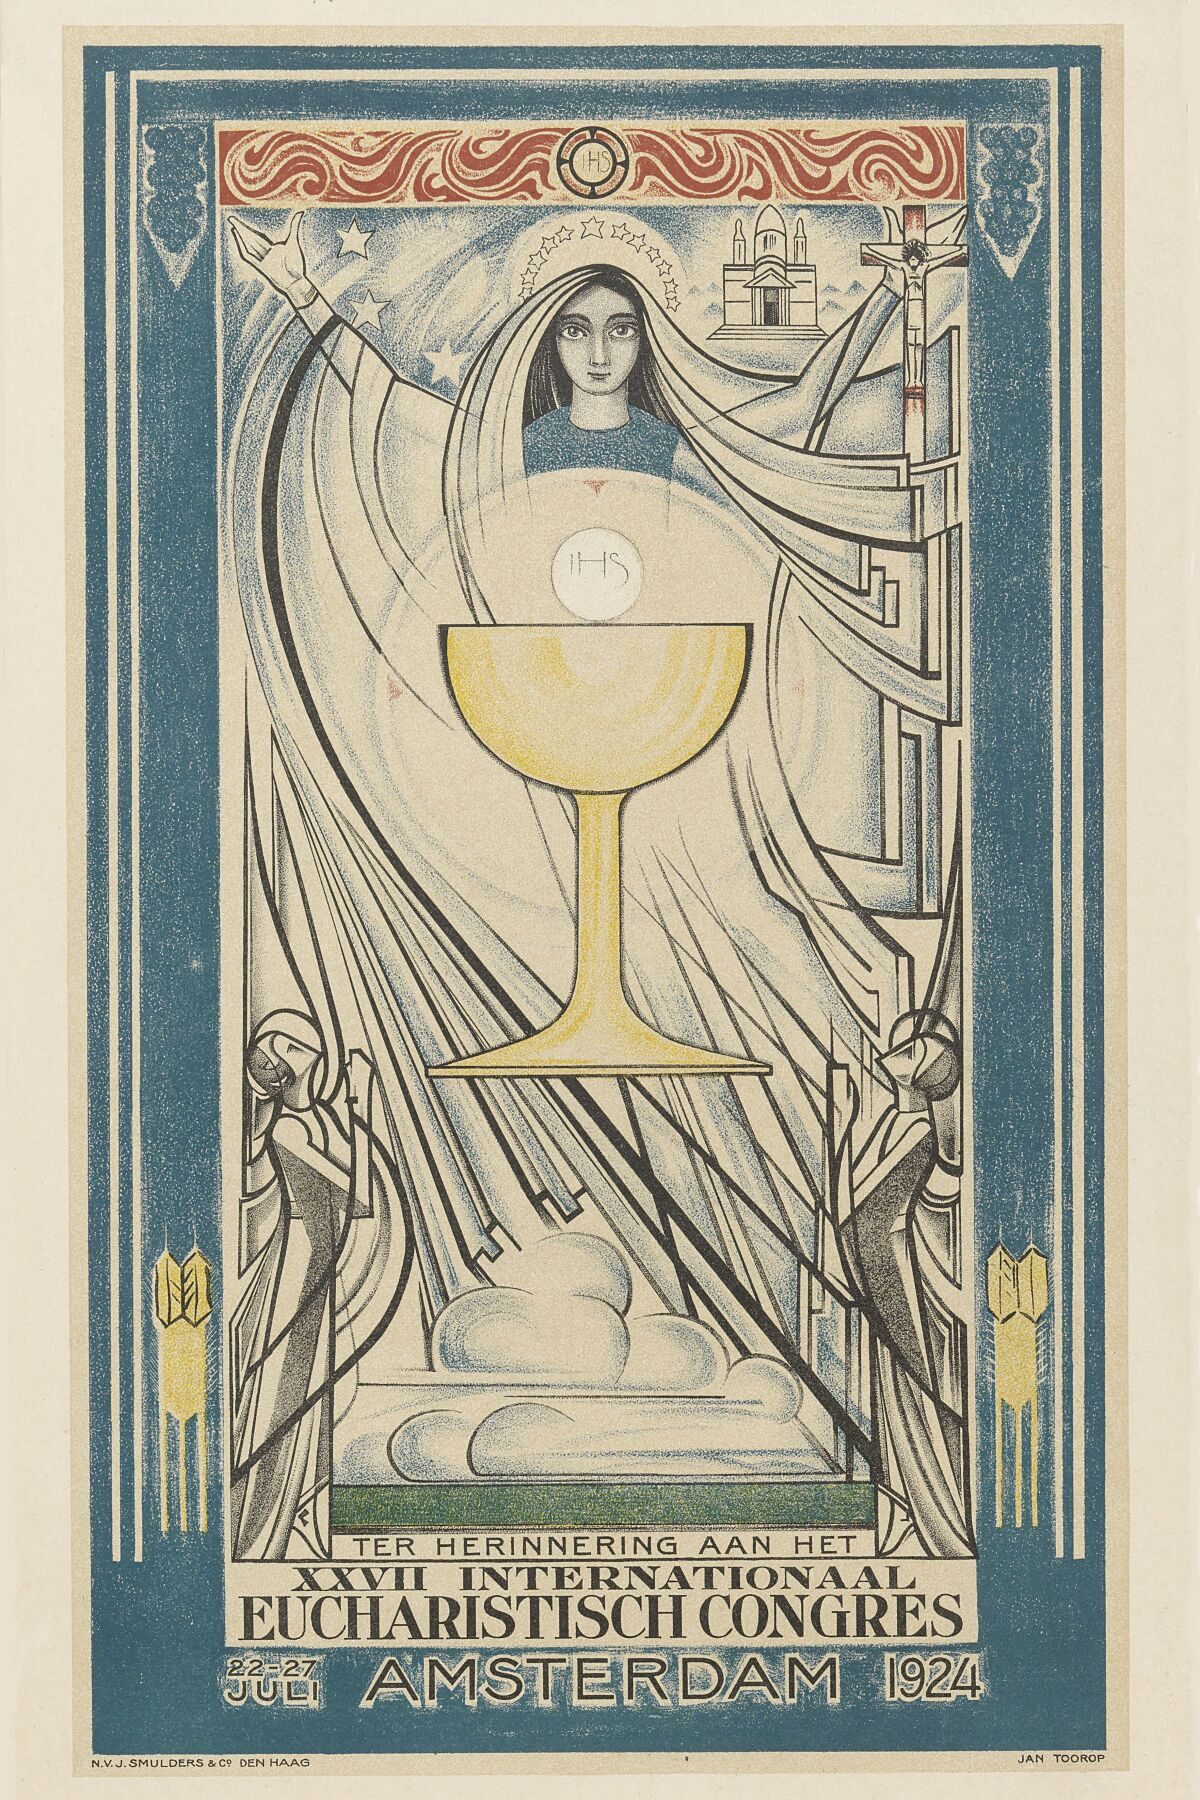 Poster for the International Eucharistic Congress by Jan Toorop, 1924